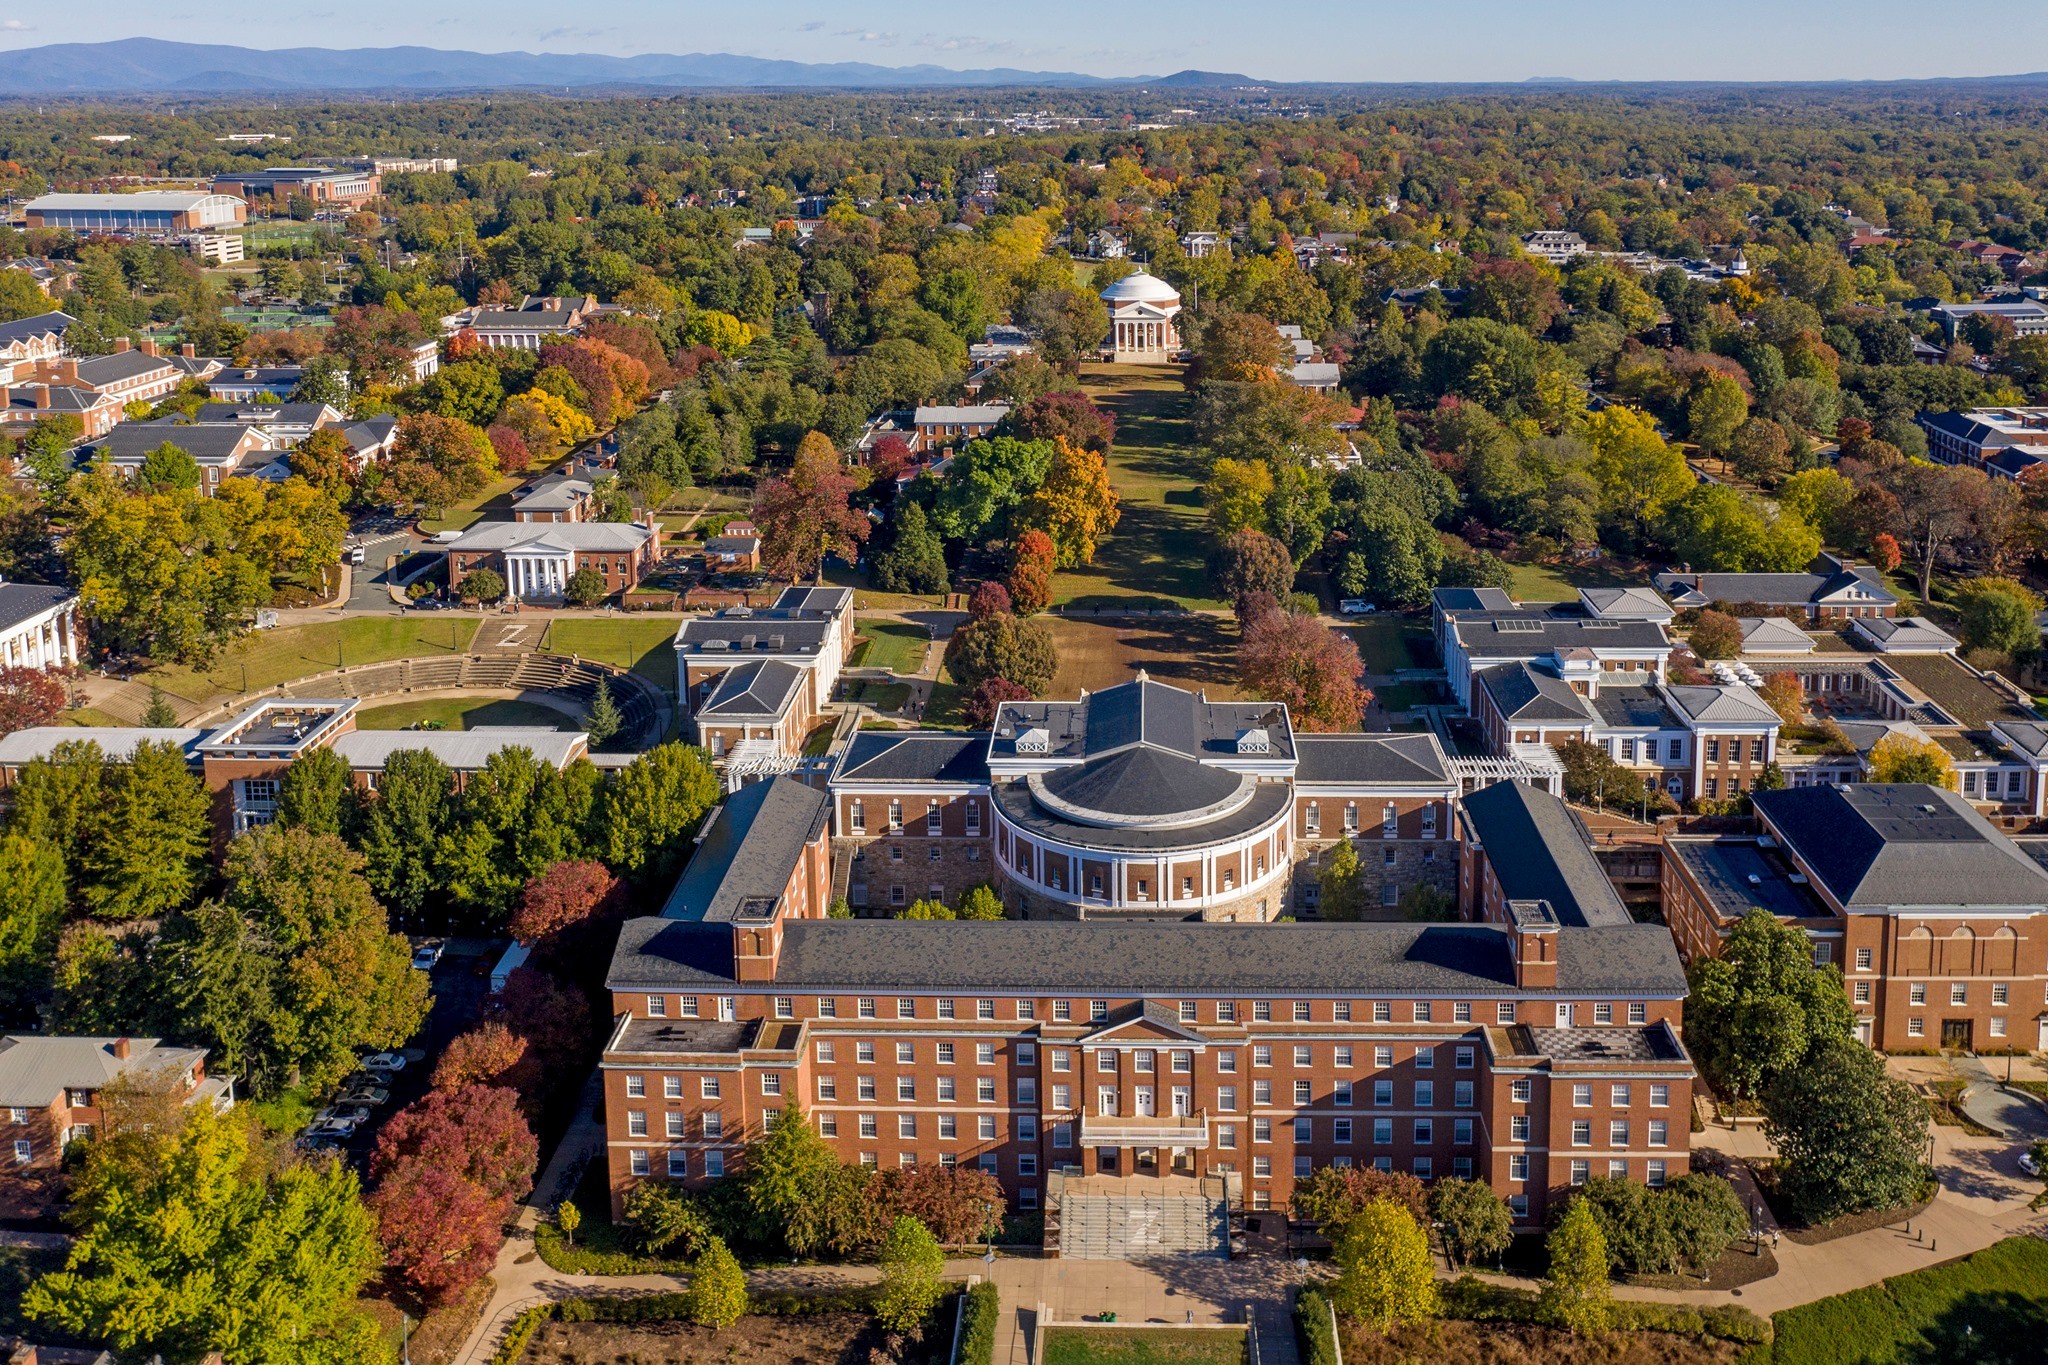 Brief Info About The University Of Virginia